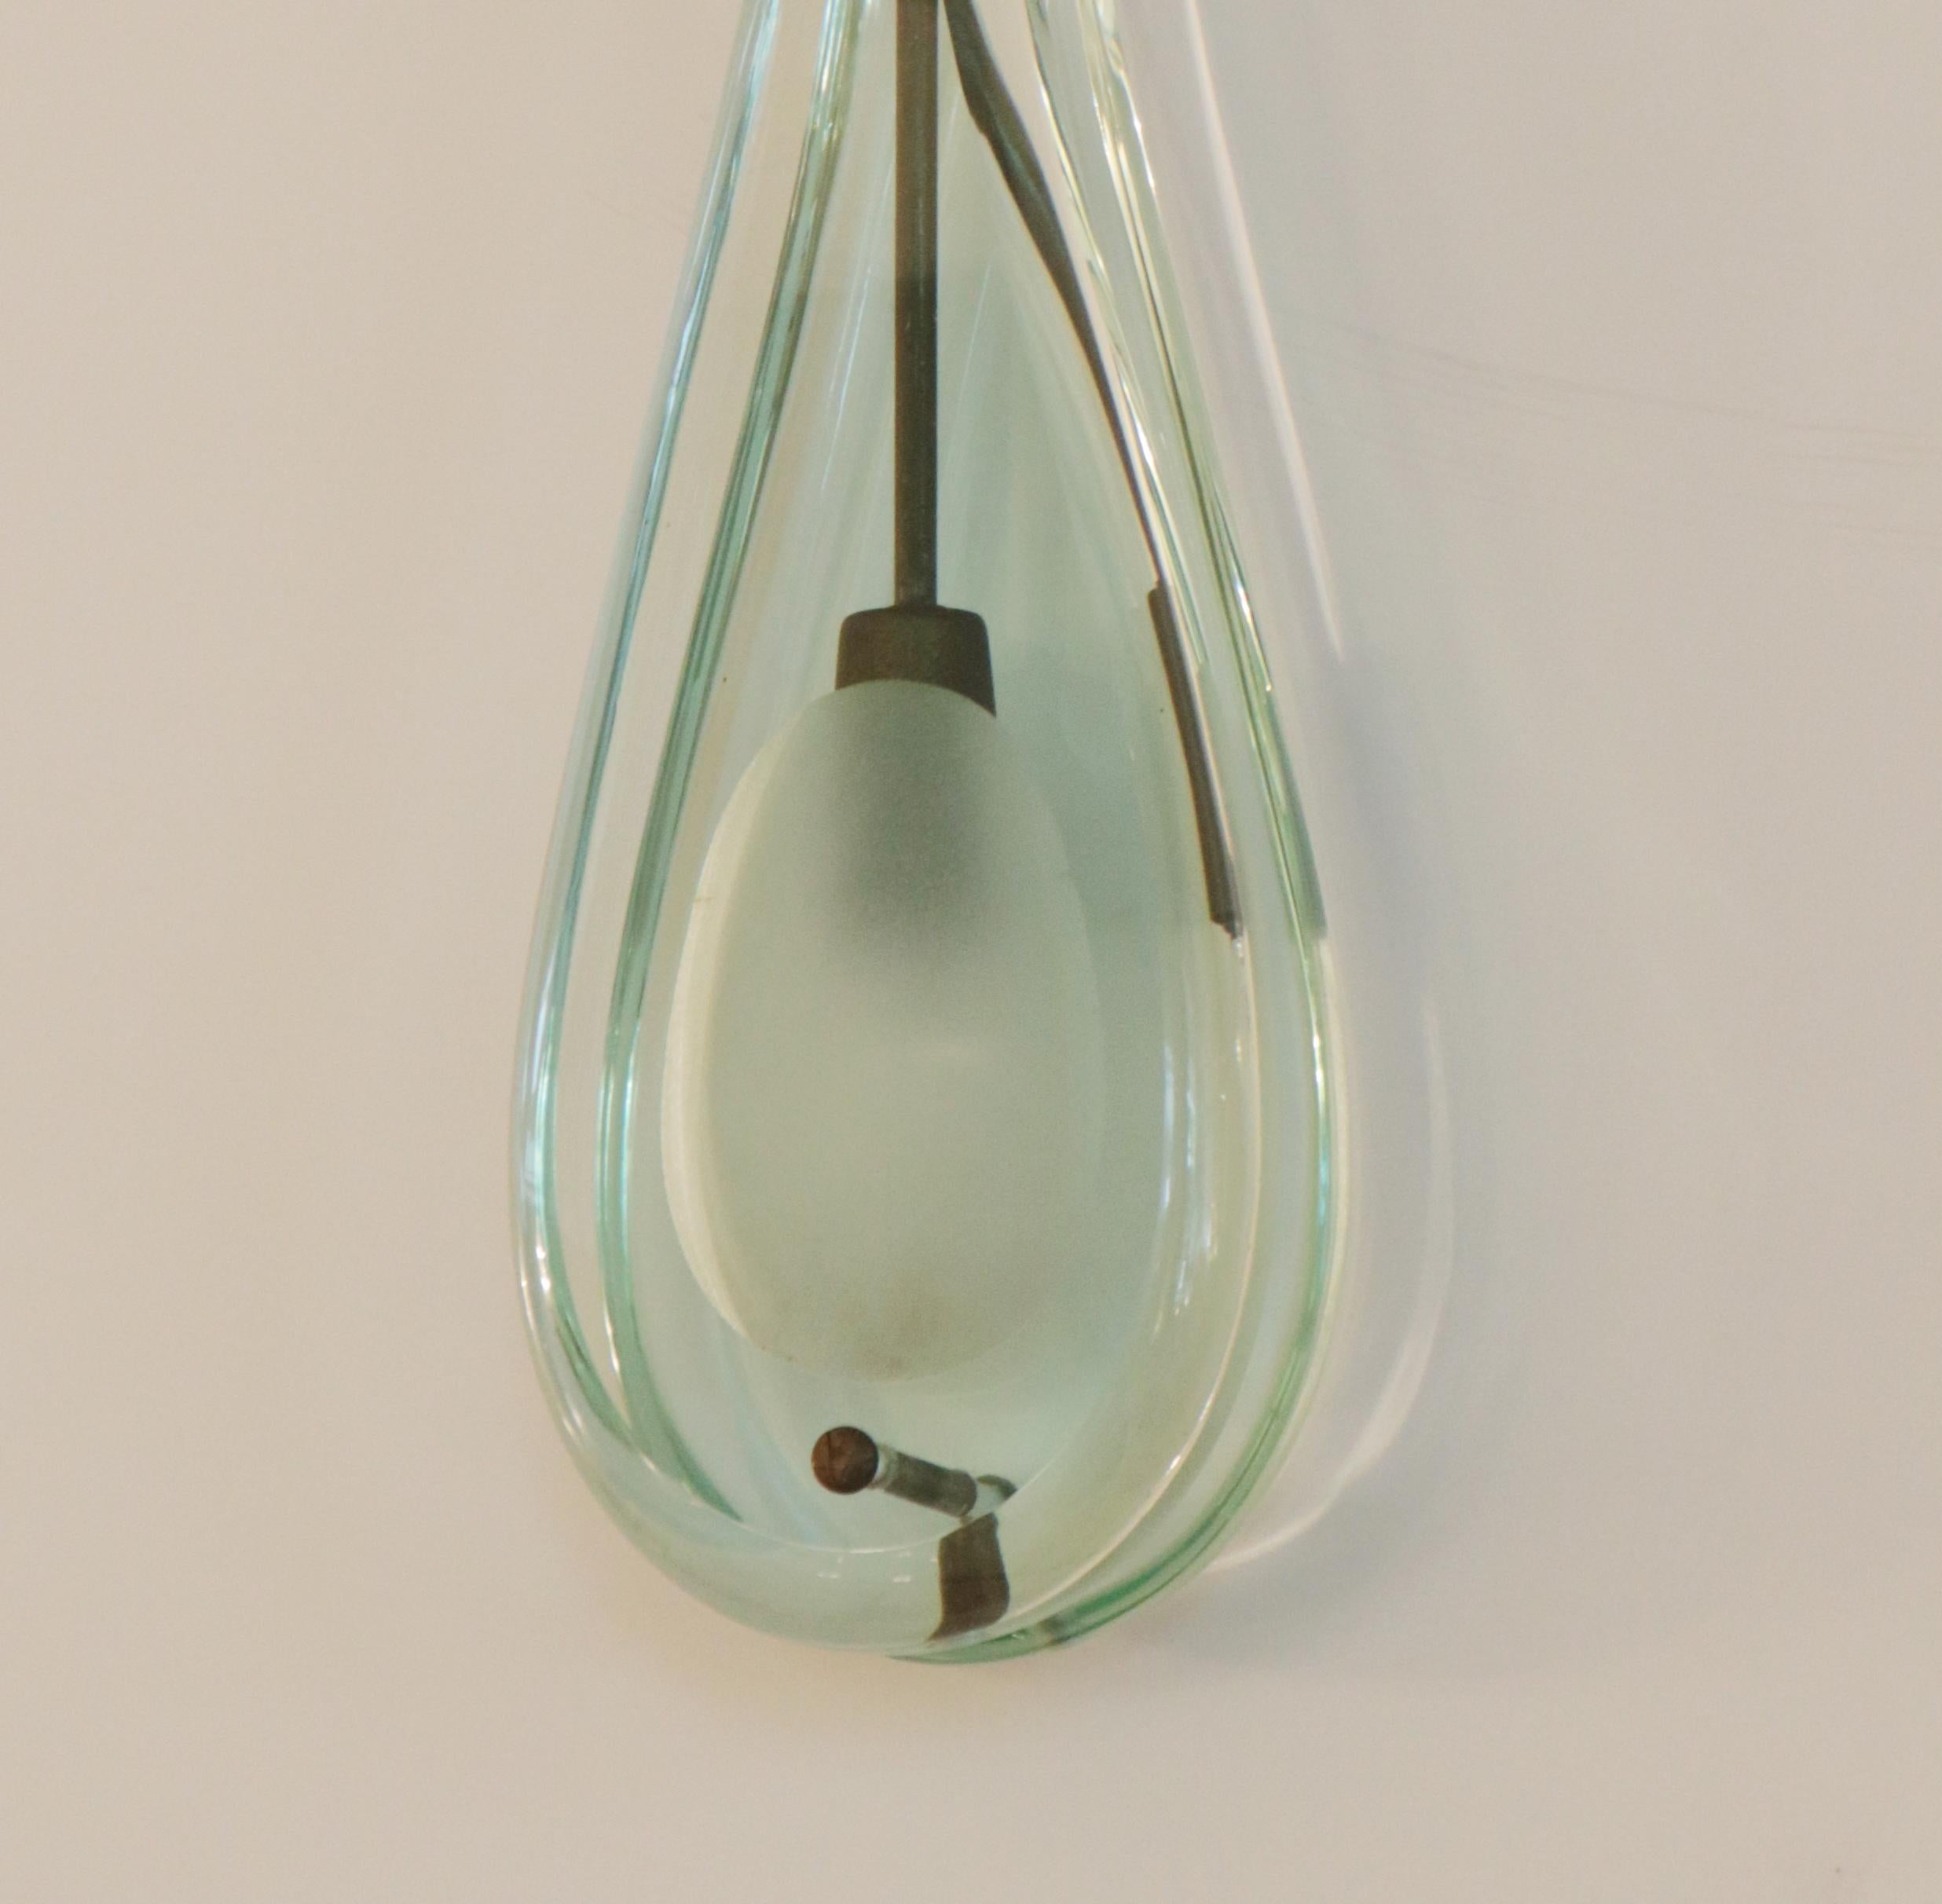 Teardrop Pendant Model # 2259 by Max Ingrand 
and manufactured by Fontana Arte.
Clear and frosted glass with patinated brass hardware.